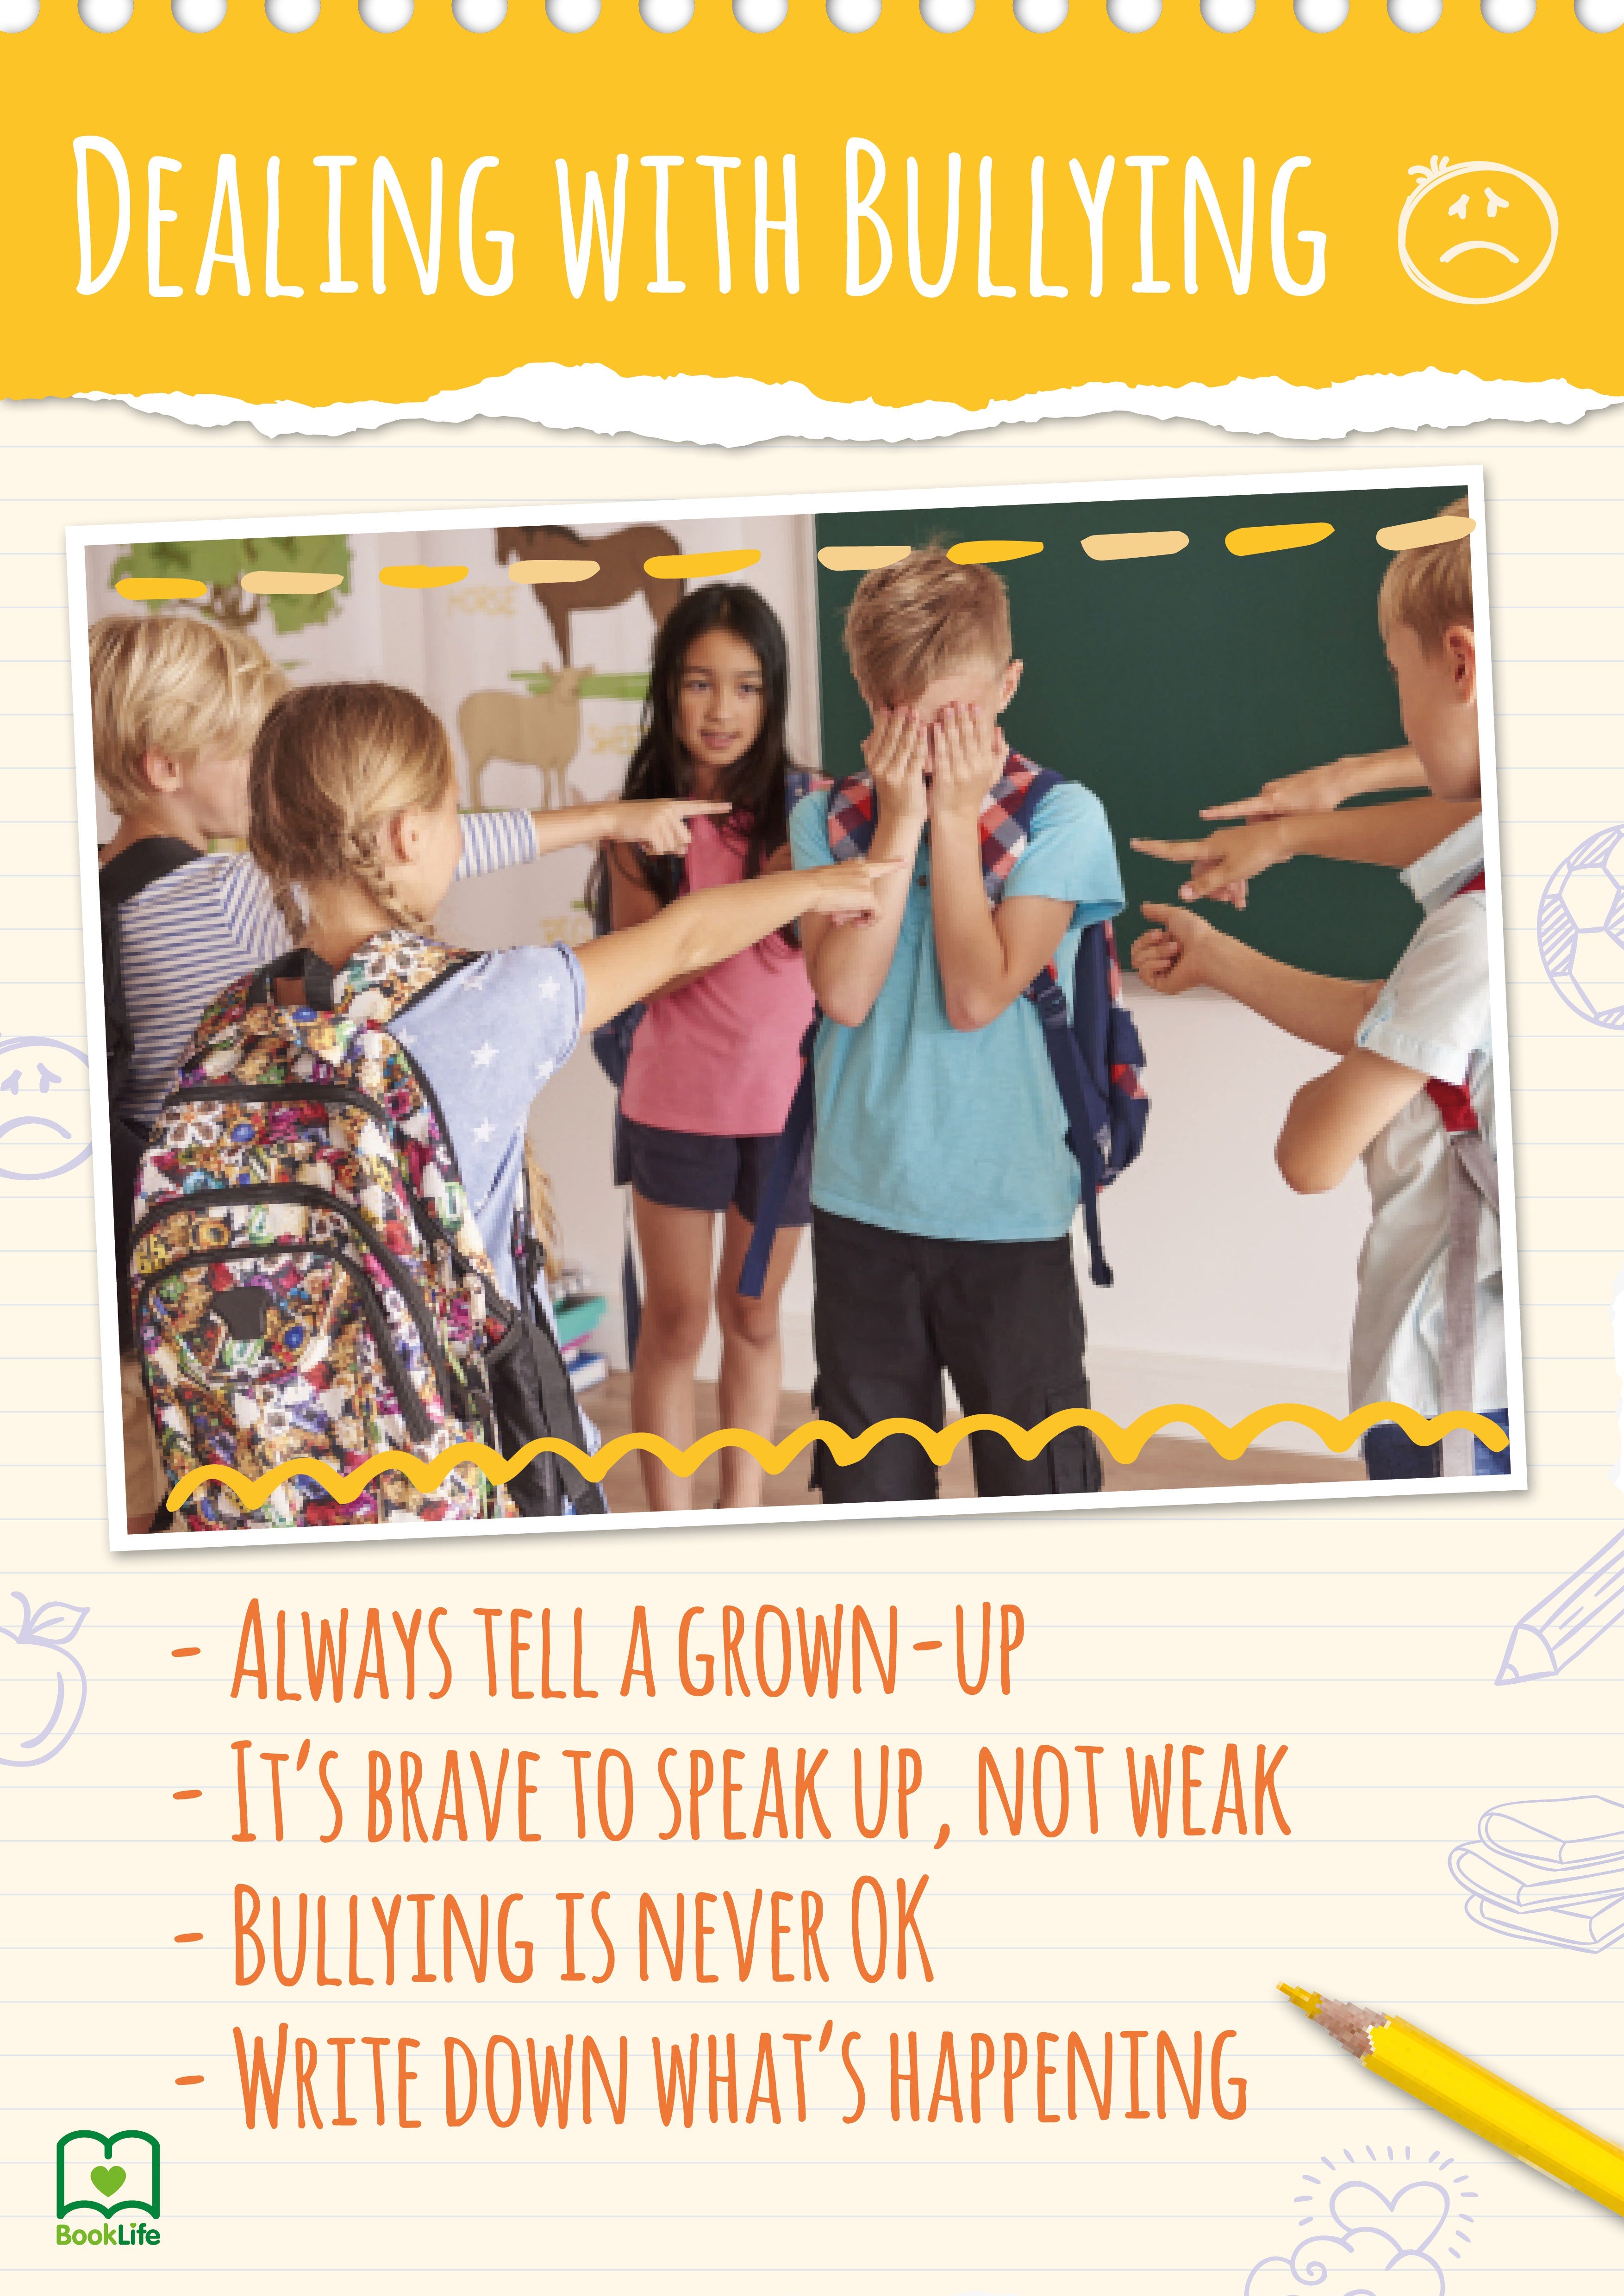 Free Dealing with Bullying Poster by BookLife